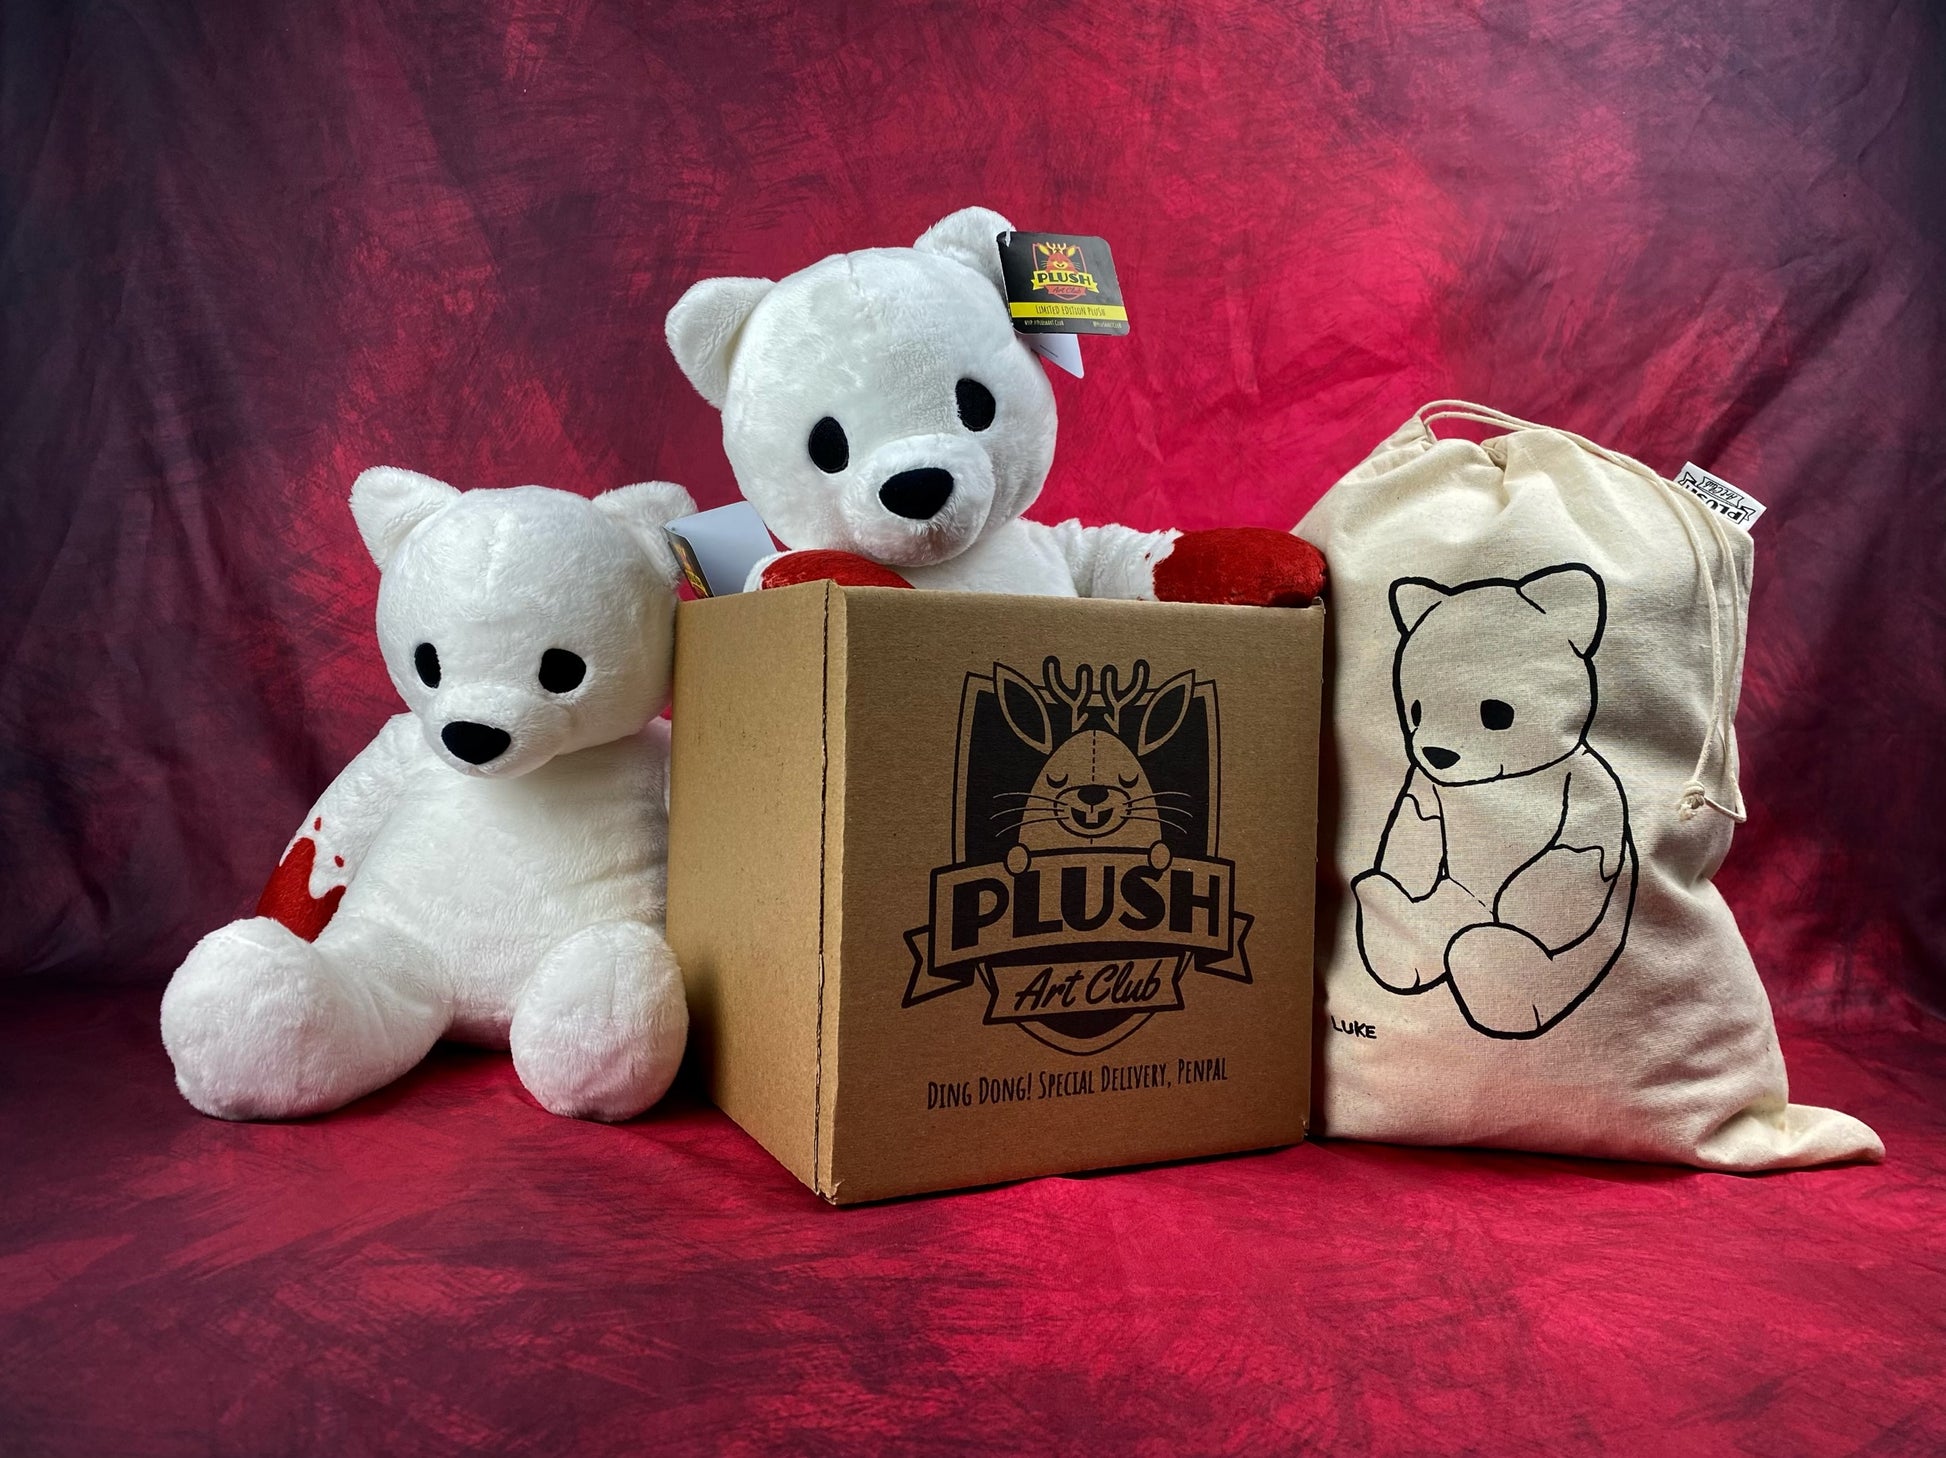 Luke Cheuh's bear as a limited-edition plush, published by Plush Art Club with design by Luke Chueh. The packaging for the bear is a dust bag with an image of Luke Chueh's bear as a plush.